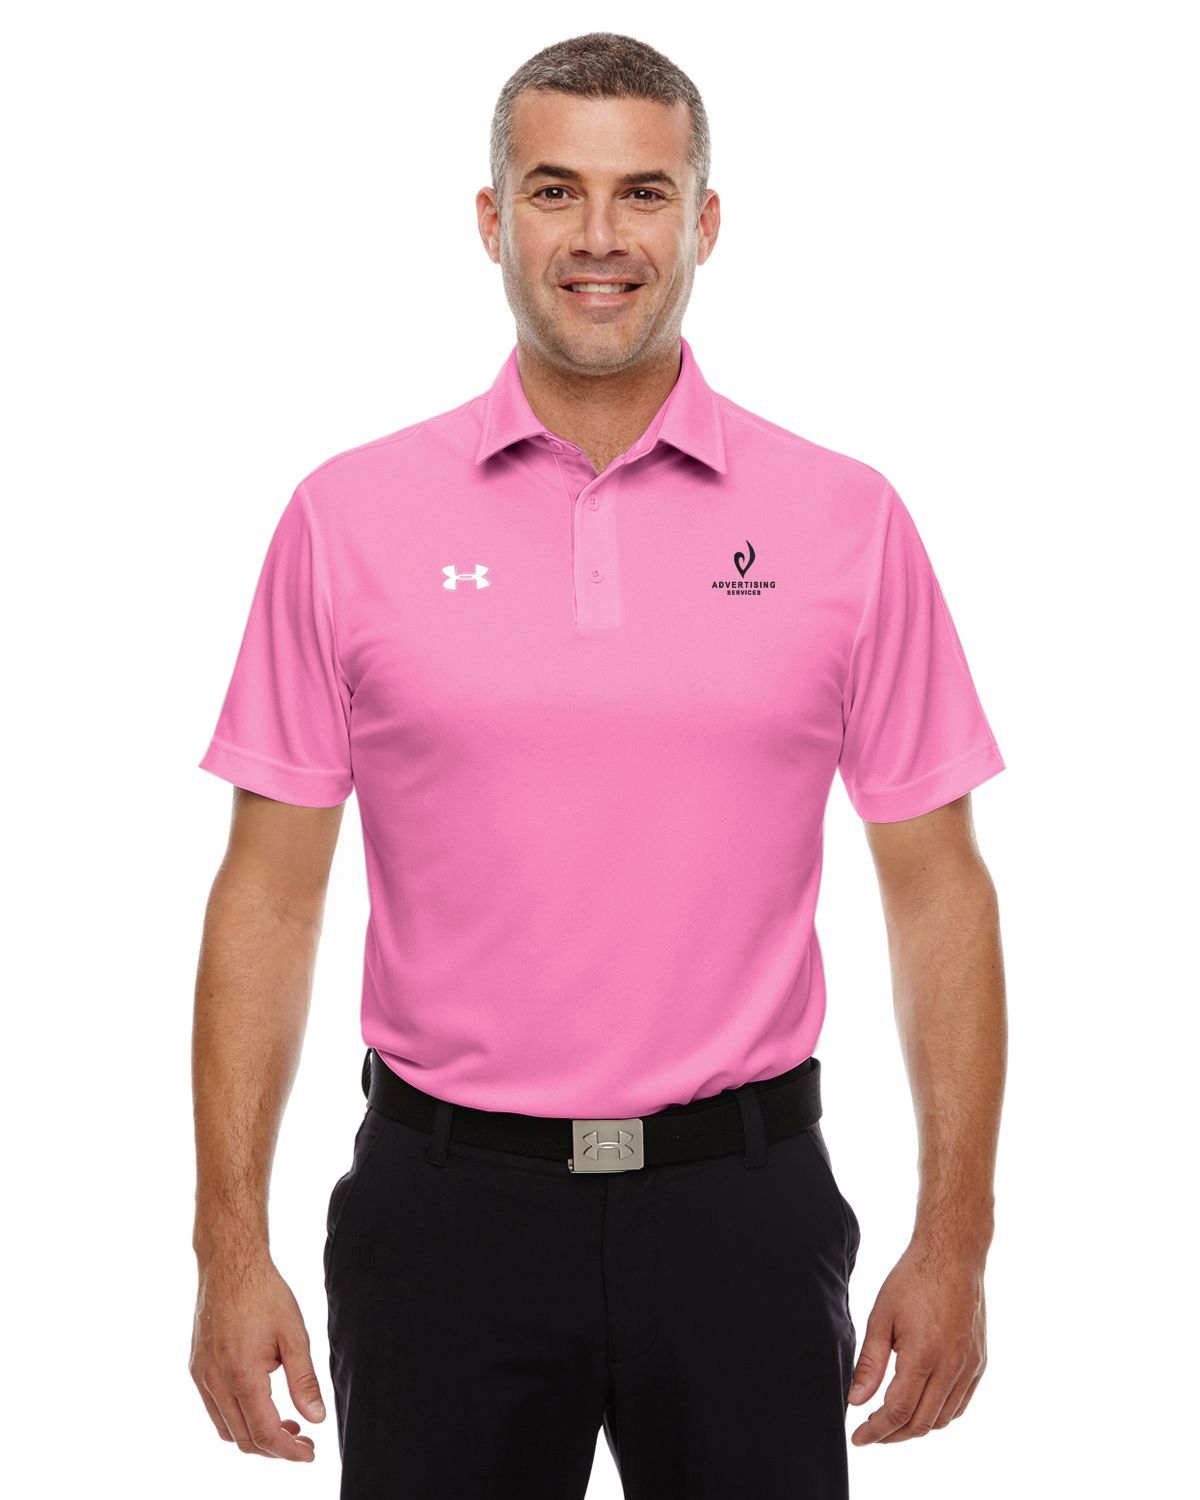 pink under armour polo mens